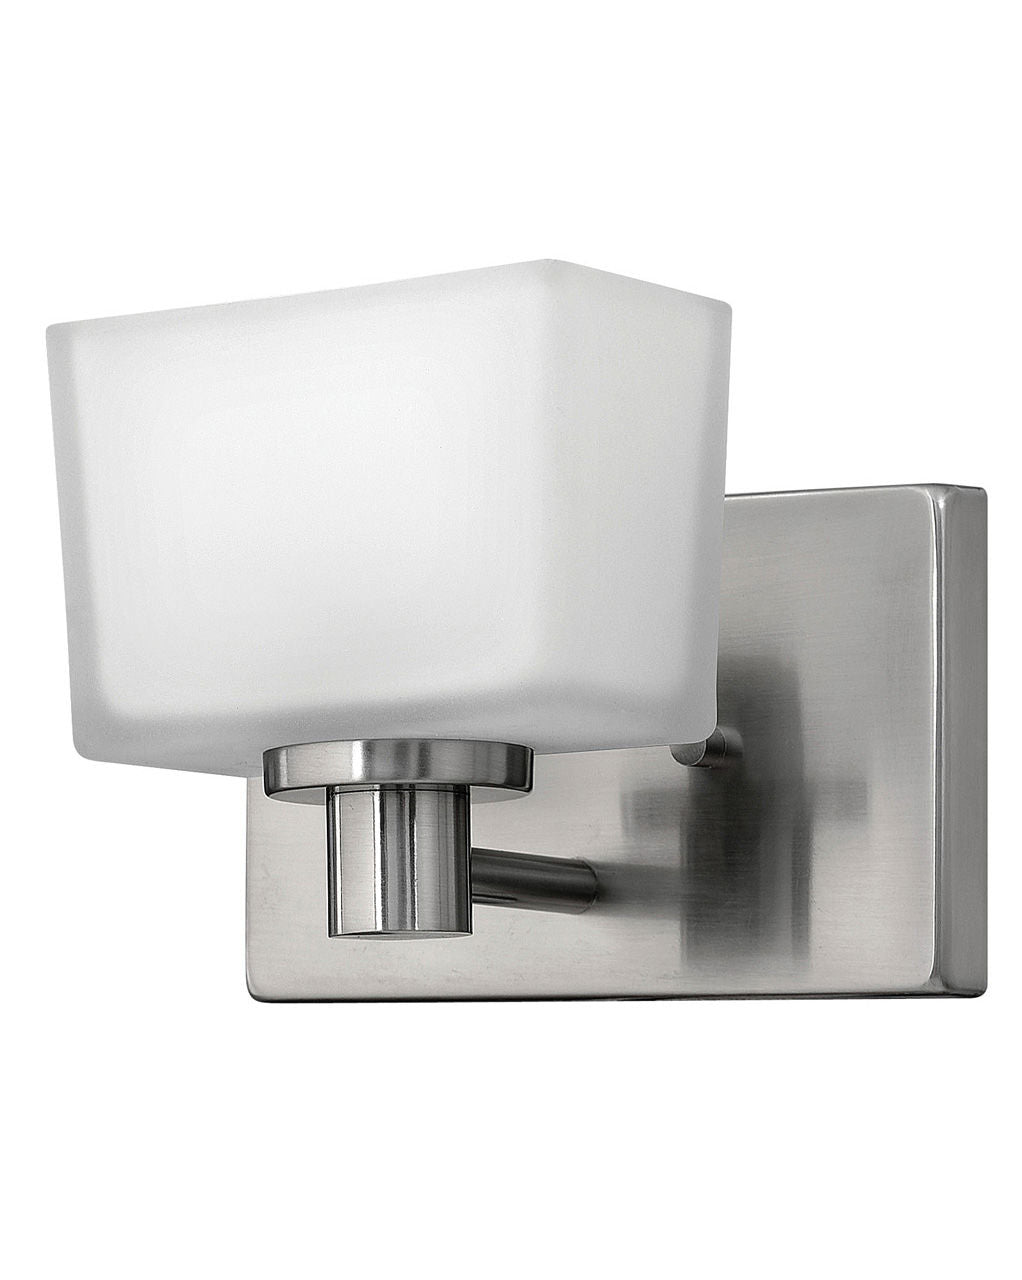 Hinkley Taylor Vanity Wall Sconce Collection